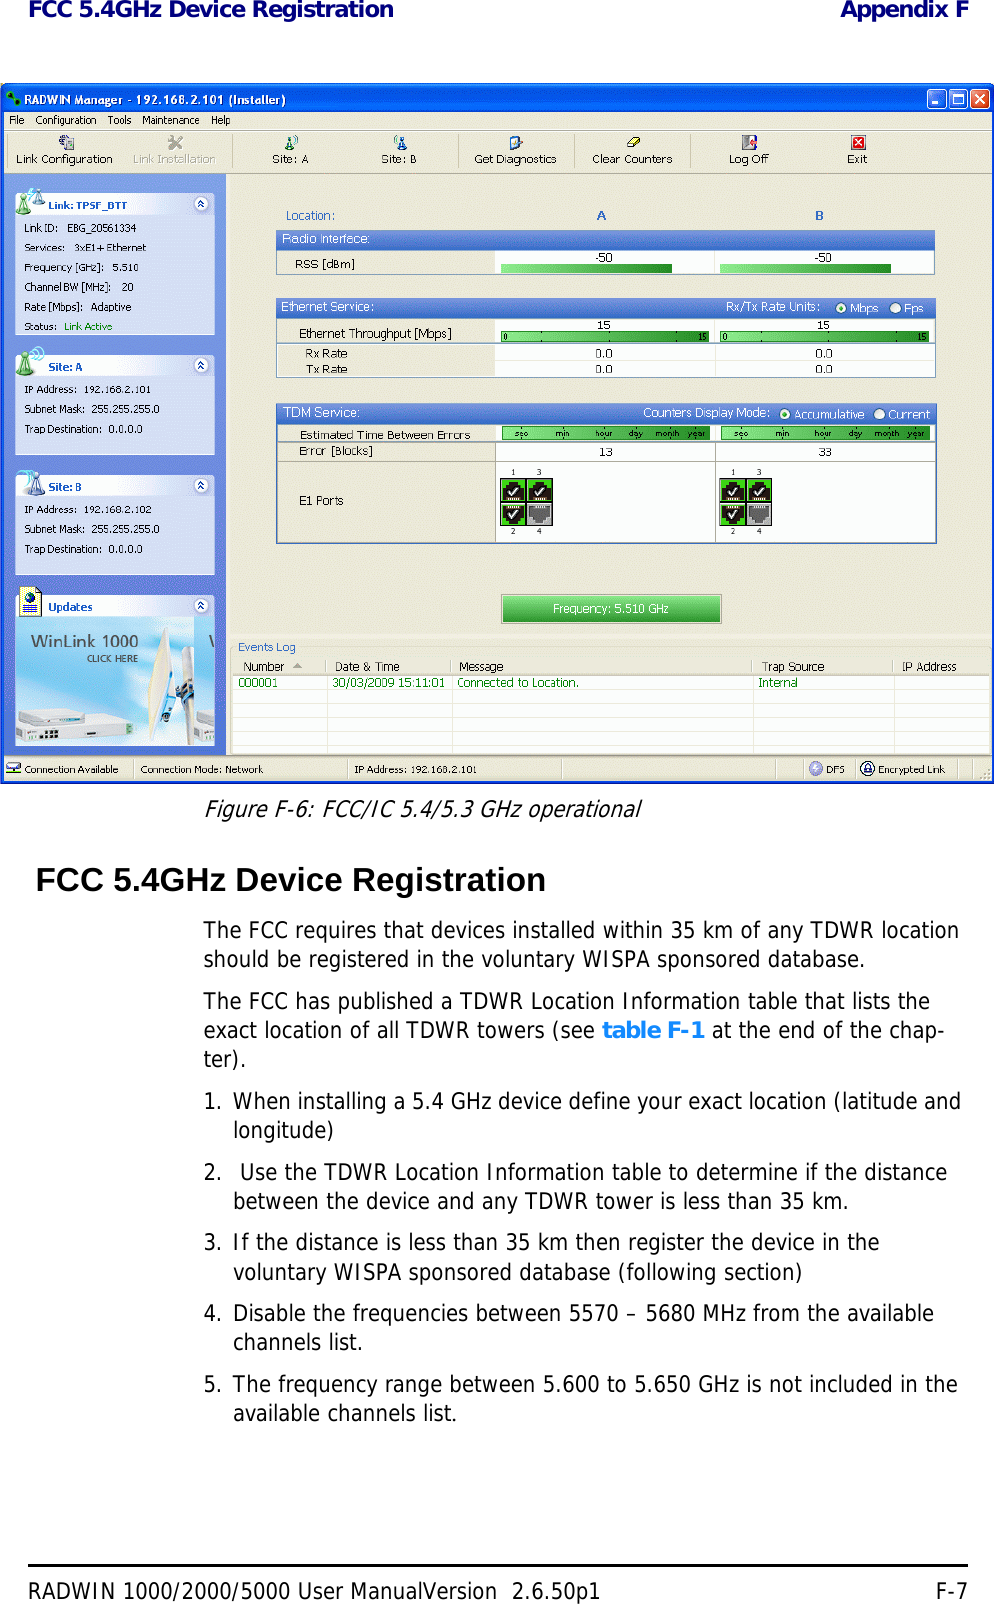 FCC 5.4GHz Device Registration Appendix FRADWIN 1000/2000/5000 User ManualVersion  2.6.50p1 F-7Figure F-6: FCC/IC 5.4/5.3 GHz operational FCC 5.4GHz Device RegistrationThe FCC requires that devices installed within 35 km of any TDWR location should be registered in the voluntary WISPA sponsored database. The FCC has published a TDWR Location Information table that lists the exact location of all TDWR towers (see table F-1 at the end of the chap-ter).1. When installing a 5.4 GHz device define your exact location (latitude and longitude)2.  Use the TDWR Location Information table to determine if the distance between the device and any TDWR tower is less than 35 km.3. If the distance is less than 35 km then register the device in the voluntary WISPA sponsored database (following section)4. Disable the frequencies between 5570 – 5680 MHz from the available channels list.5. The frequency range between 5.600 to 5.650 GHz is not included in the available channels list.